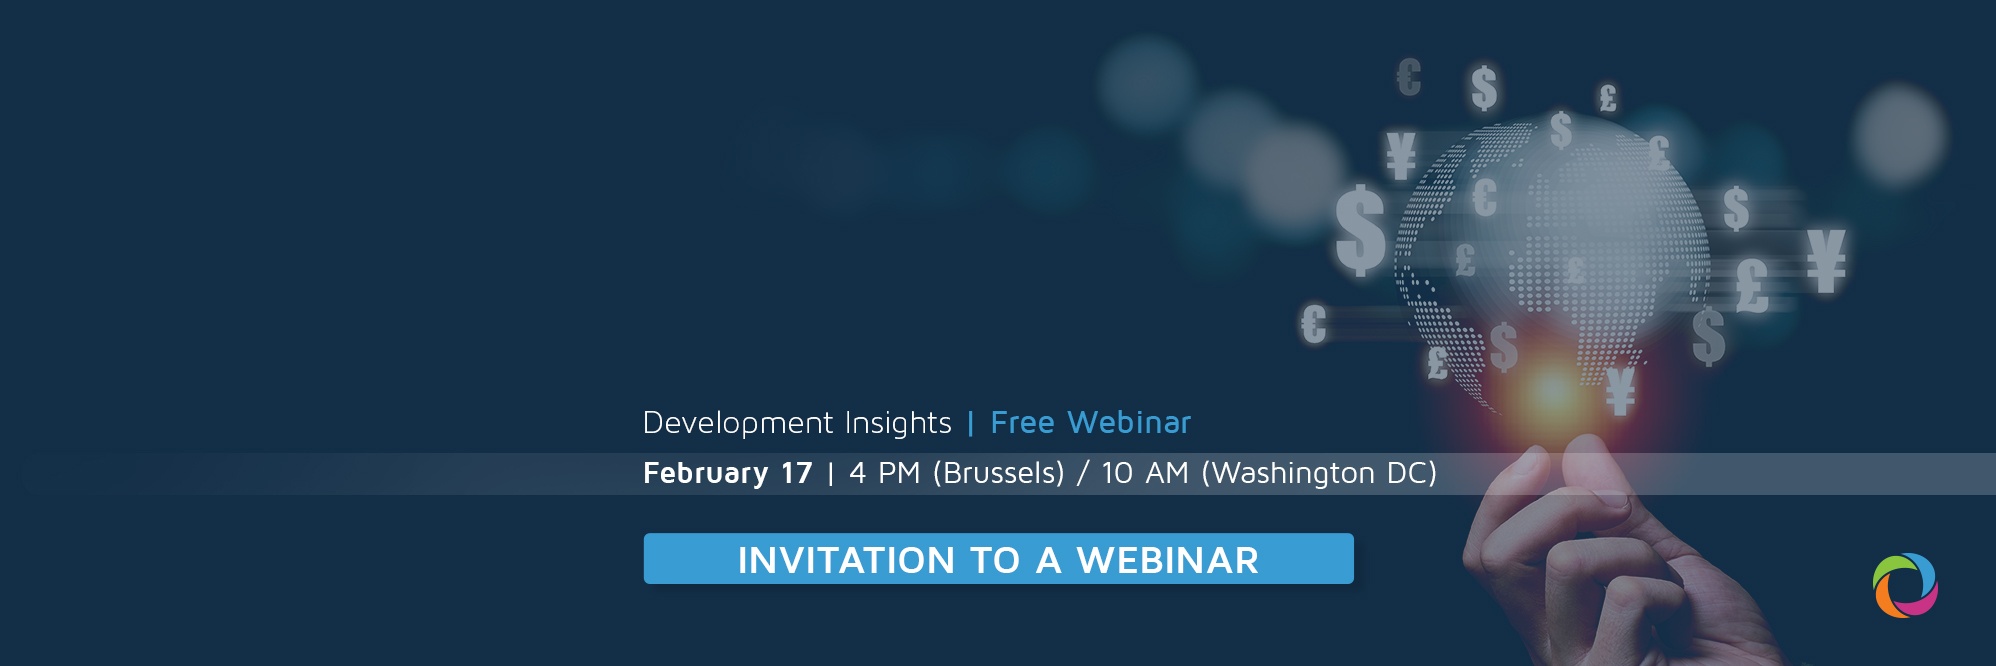 Best practices to recruit international experts for donor funded projects  | Invitation to a Webinar